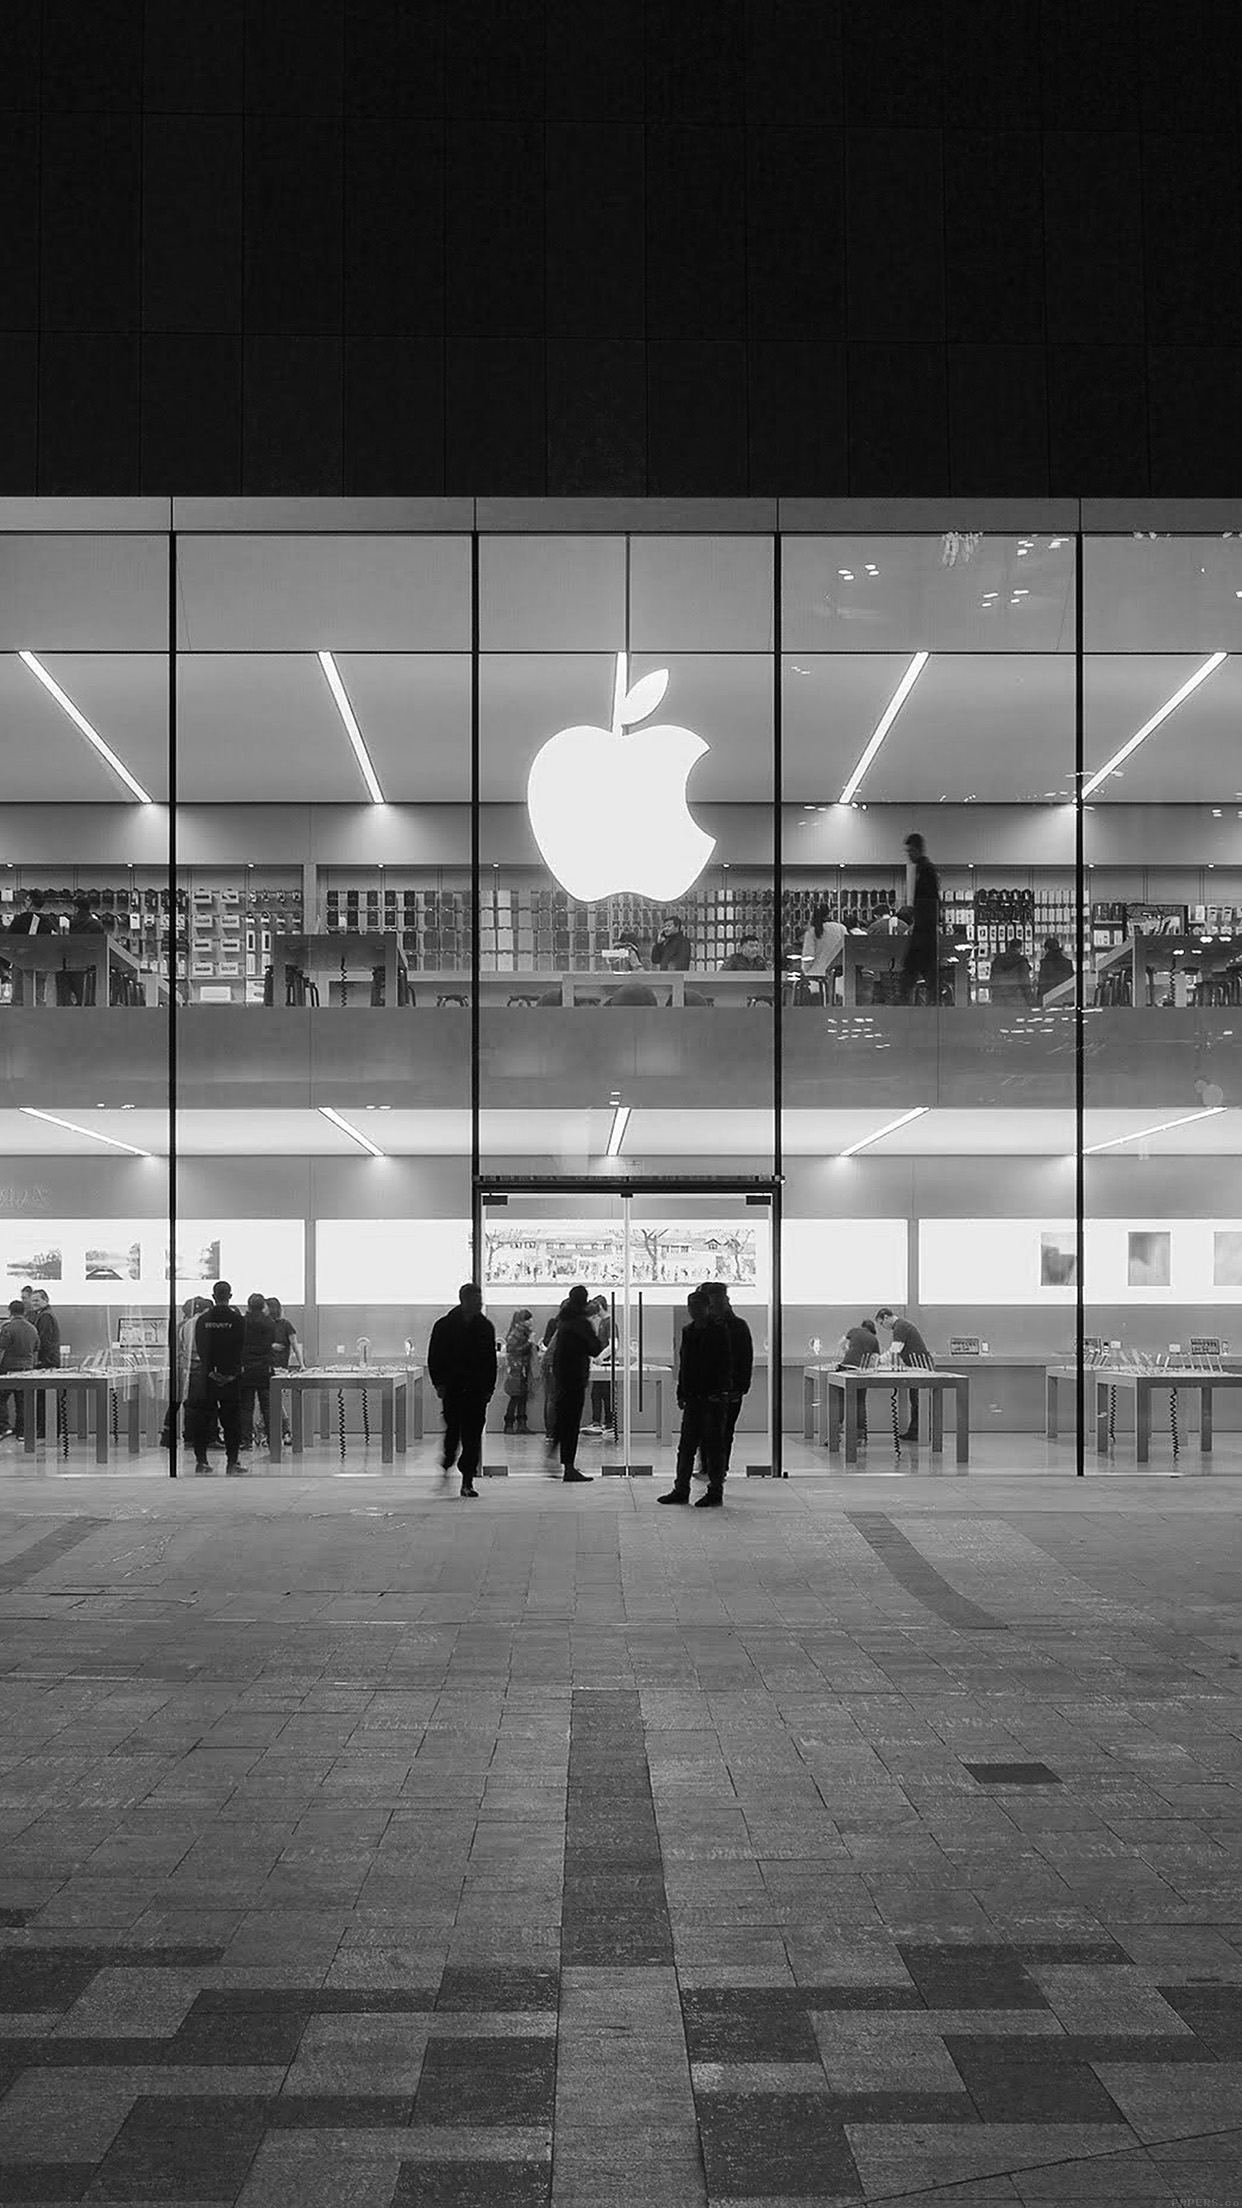 Apple Store Front Bw Dark Architecture City Android wallpaper